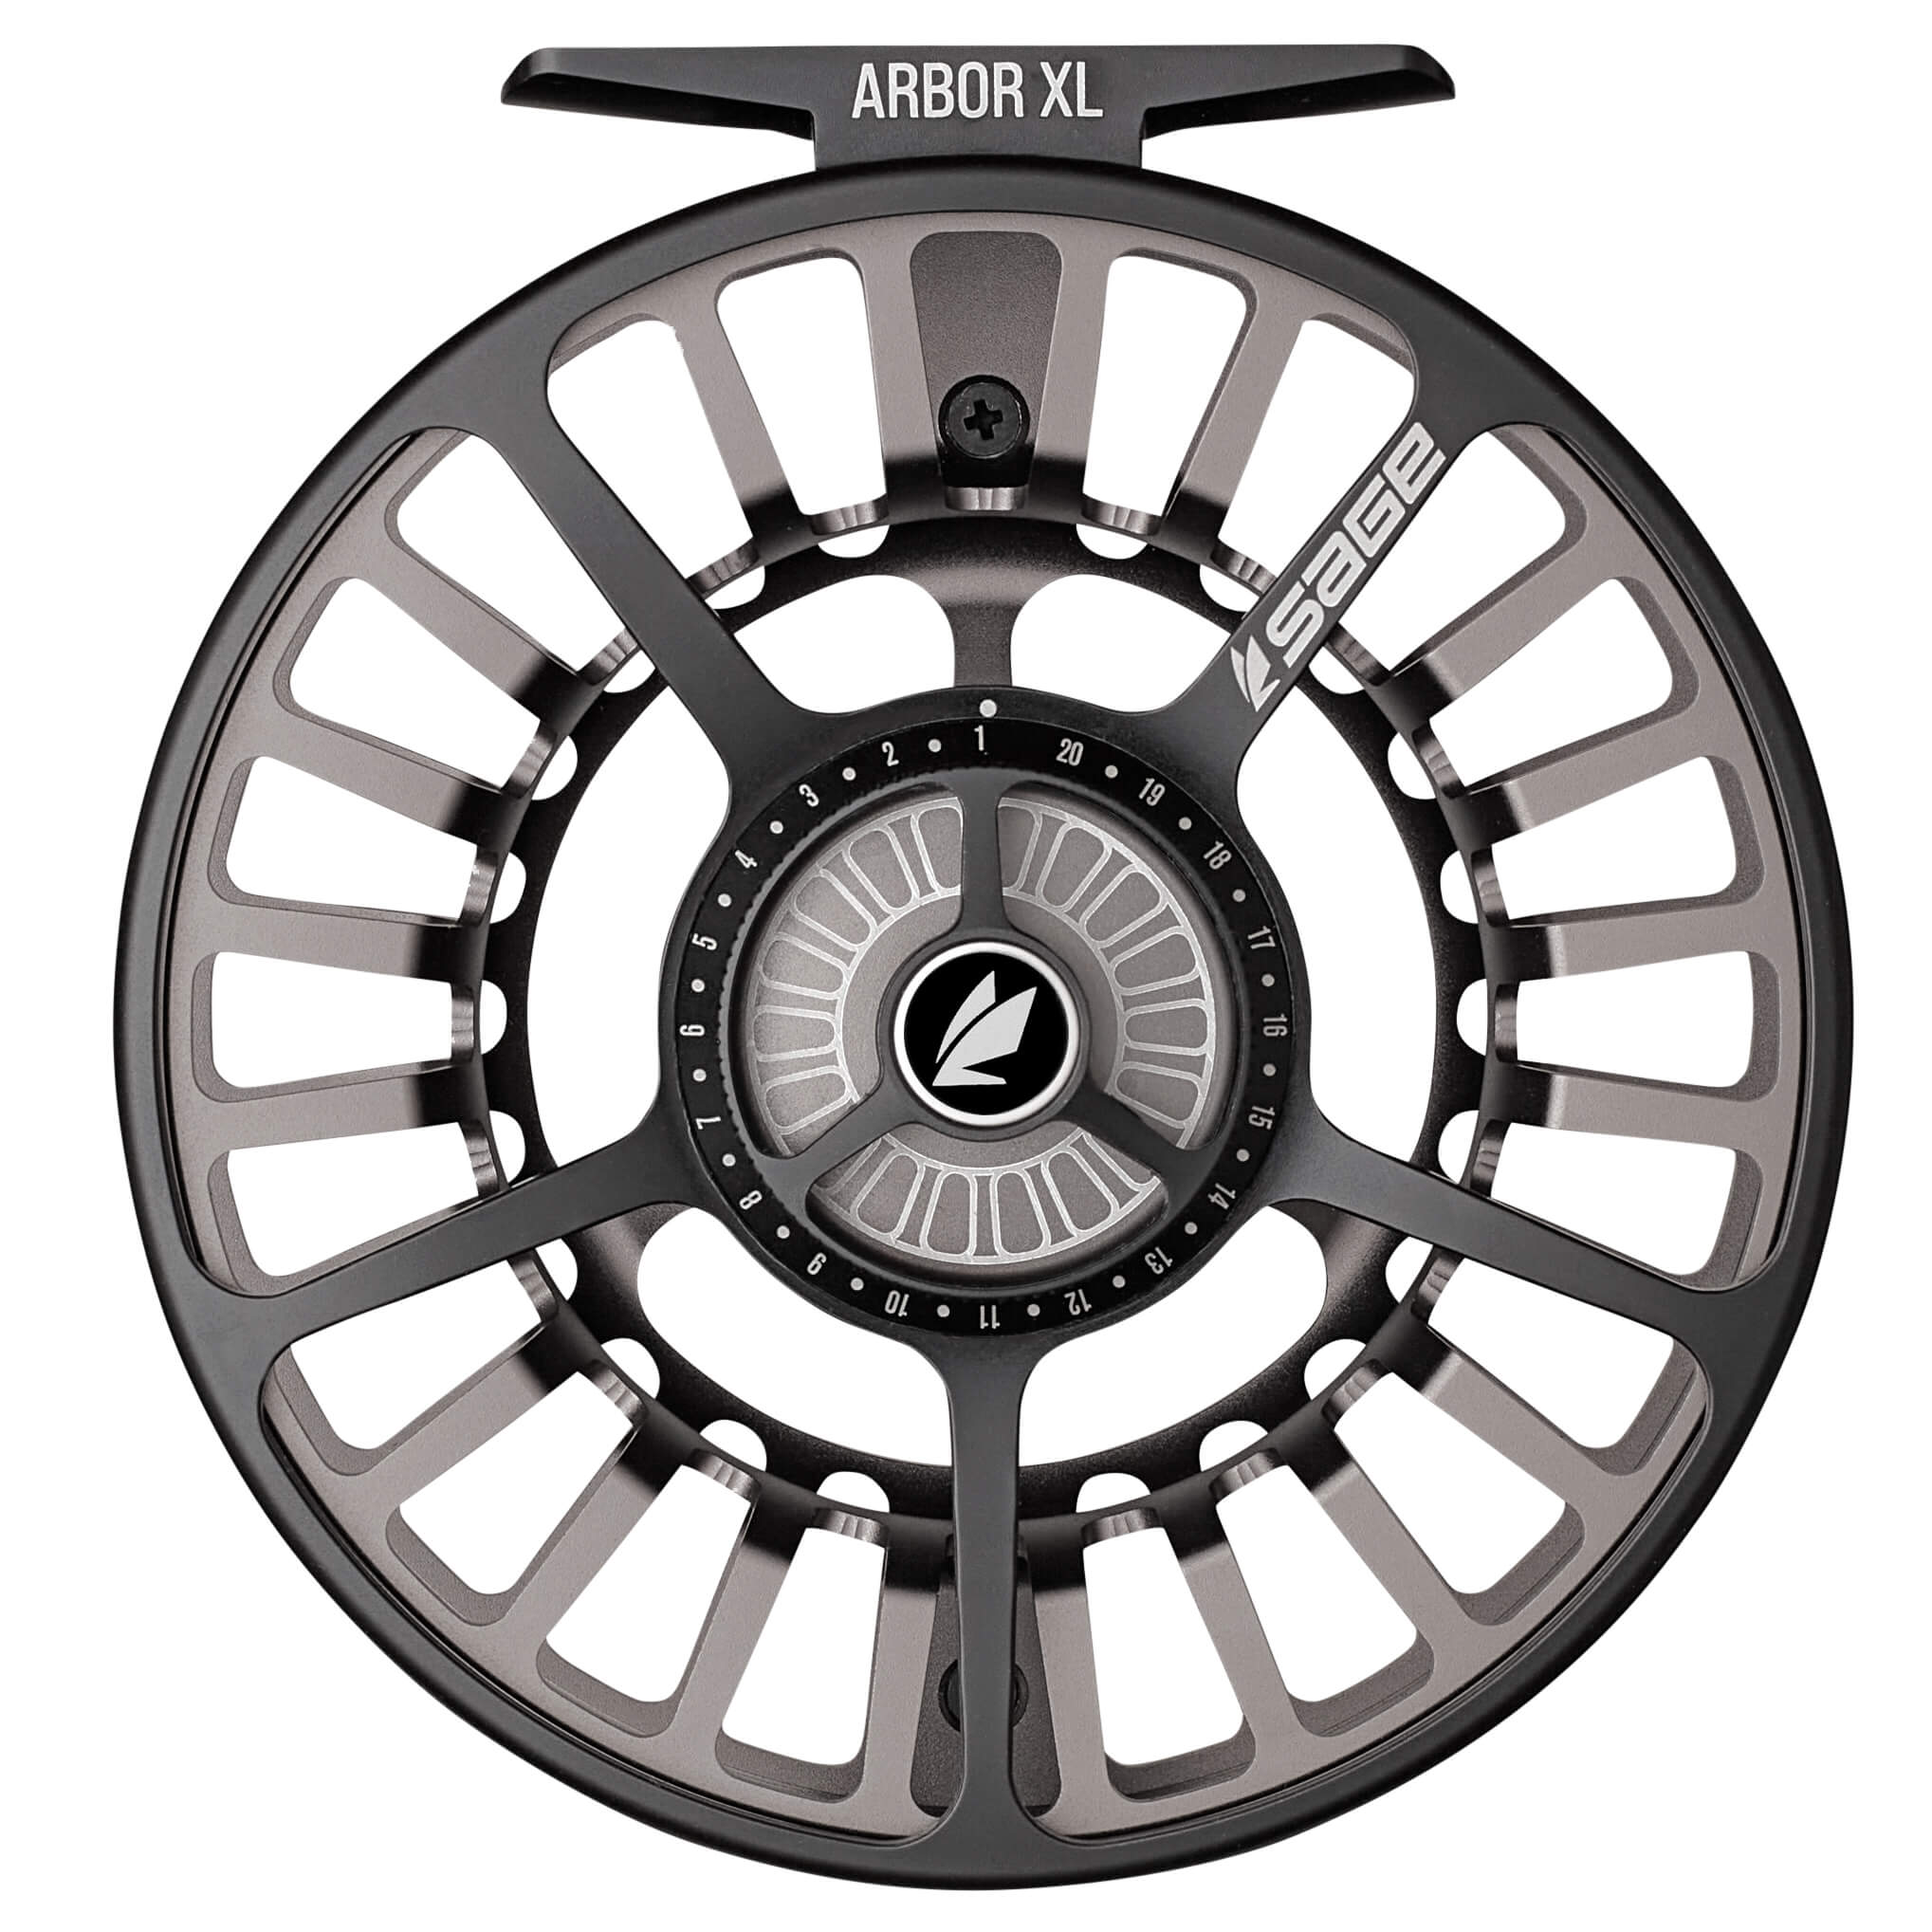 Fly Reel Product Image On White Background.